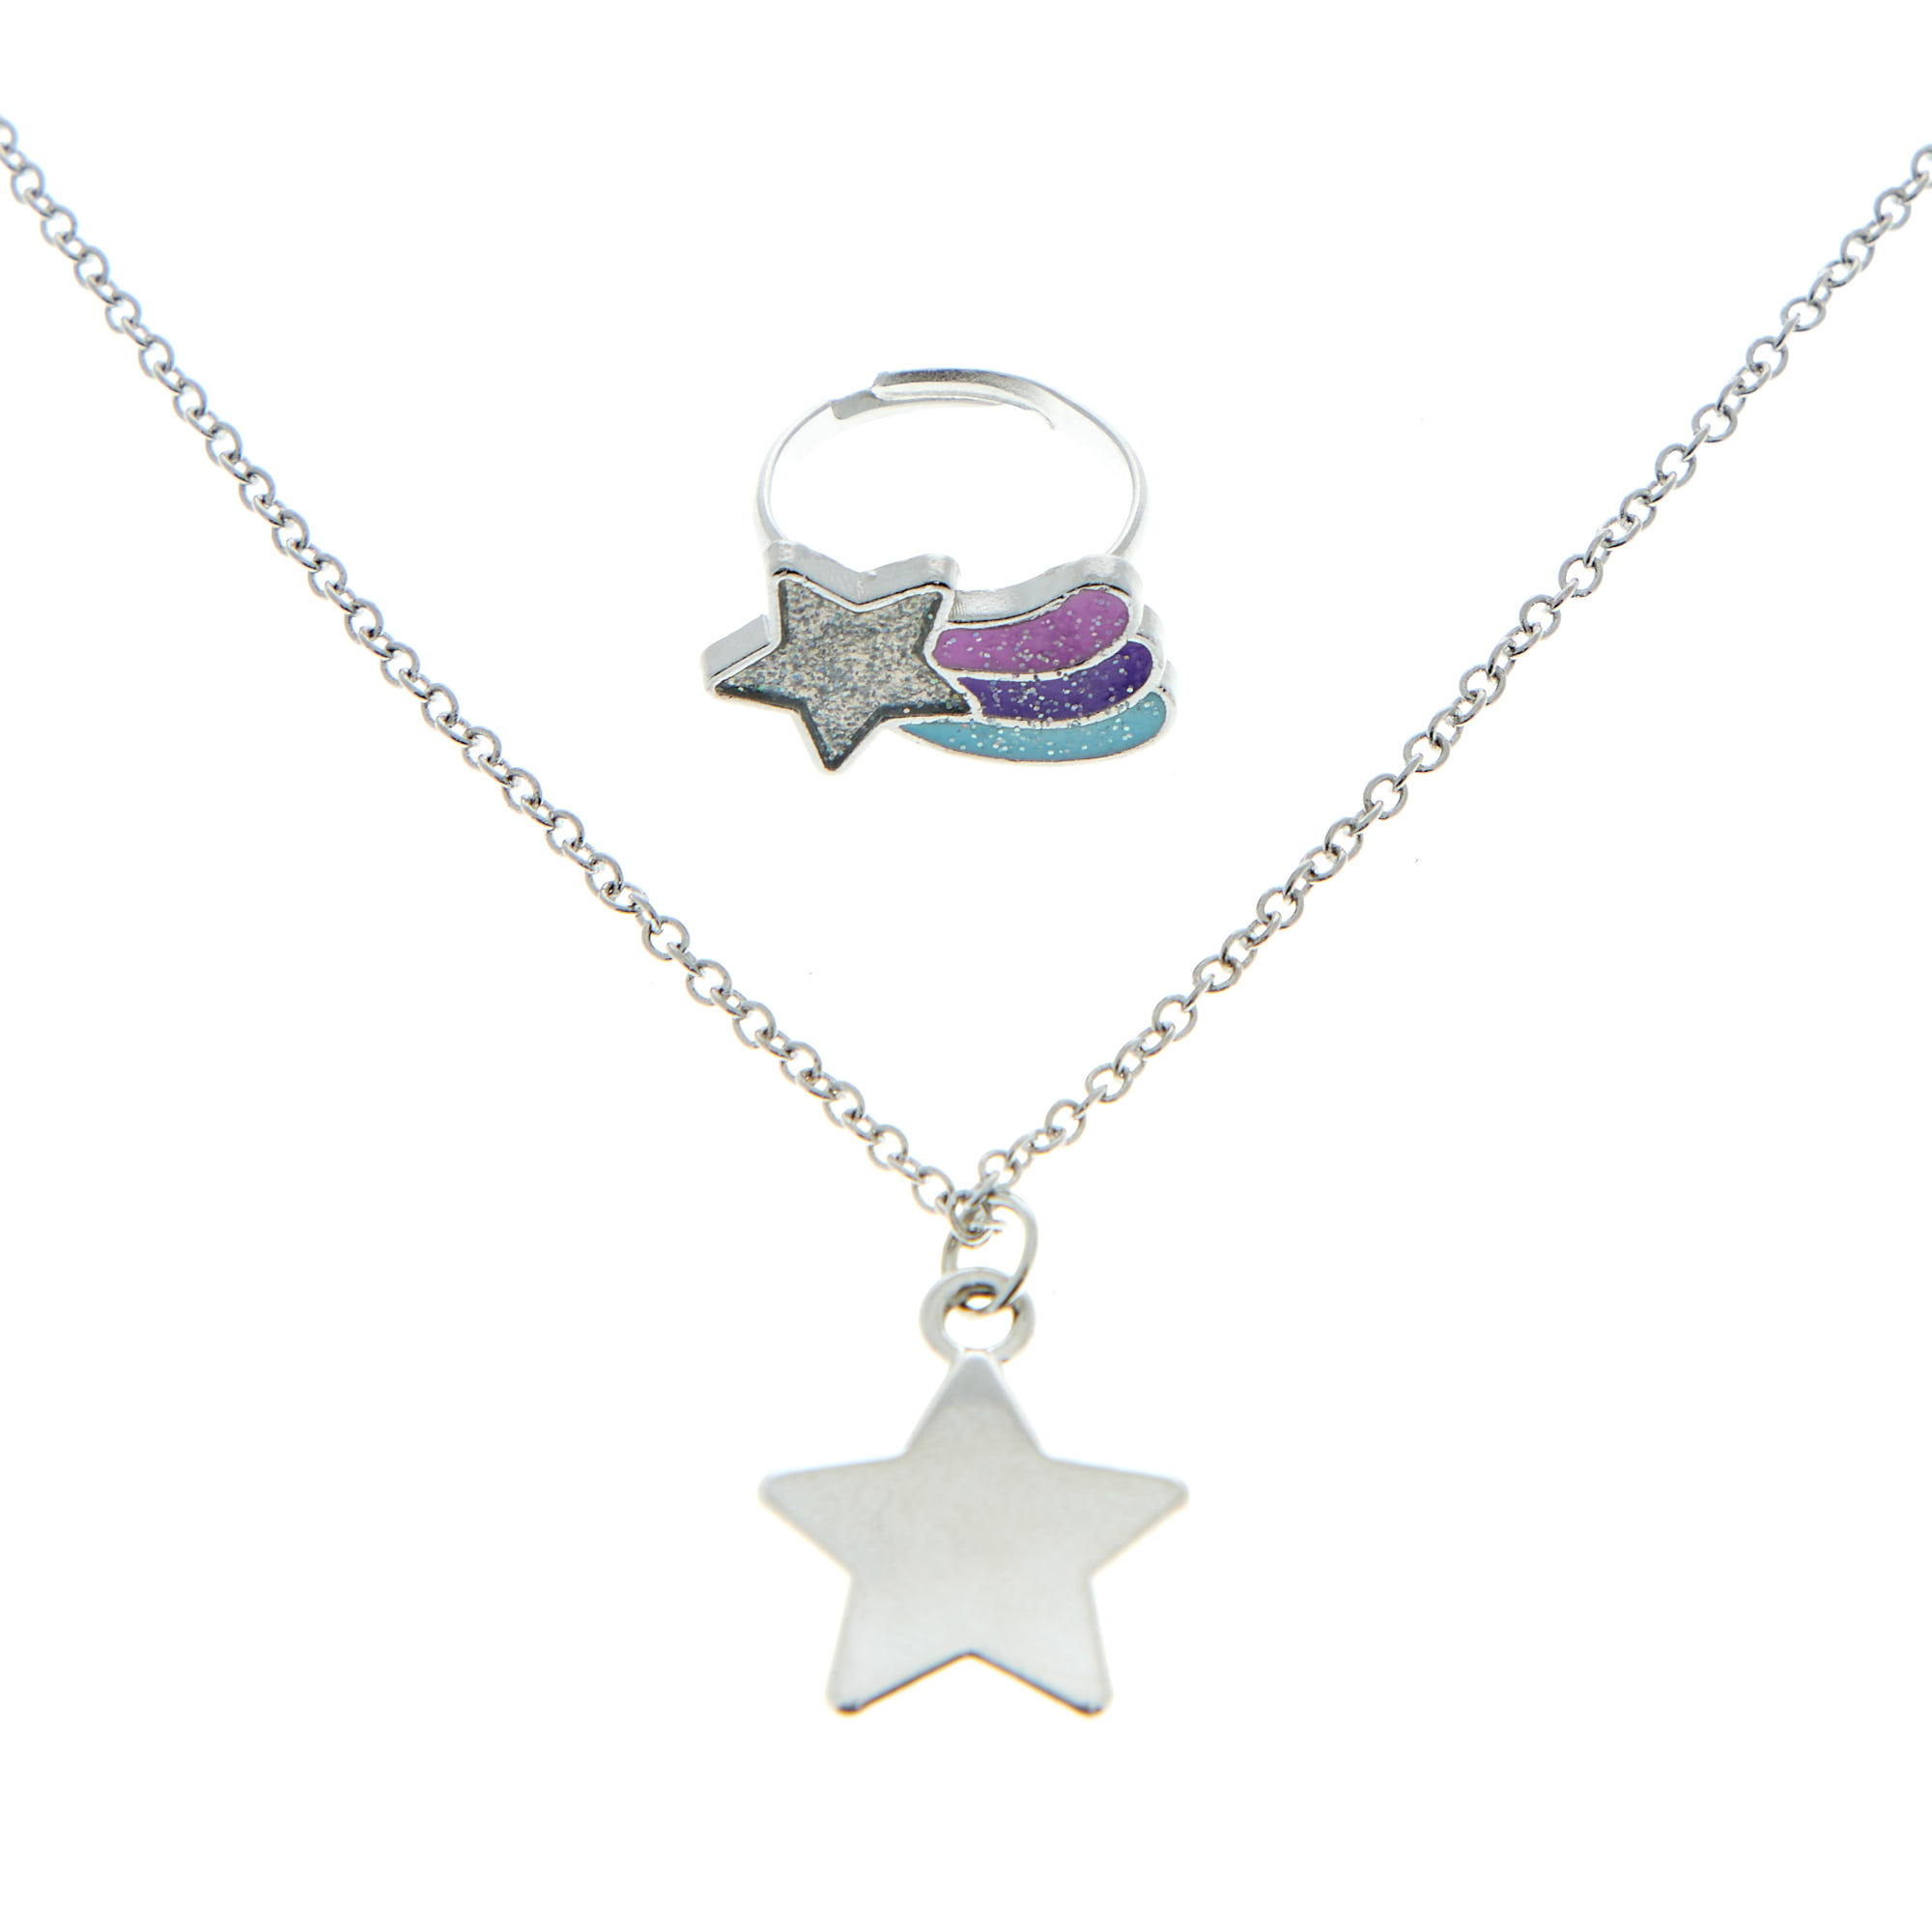 Starry Necklace & Ring Set